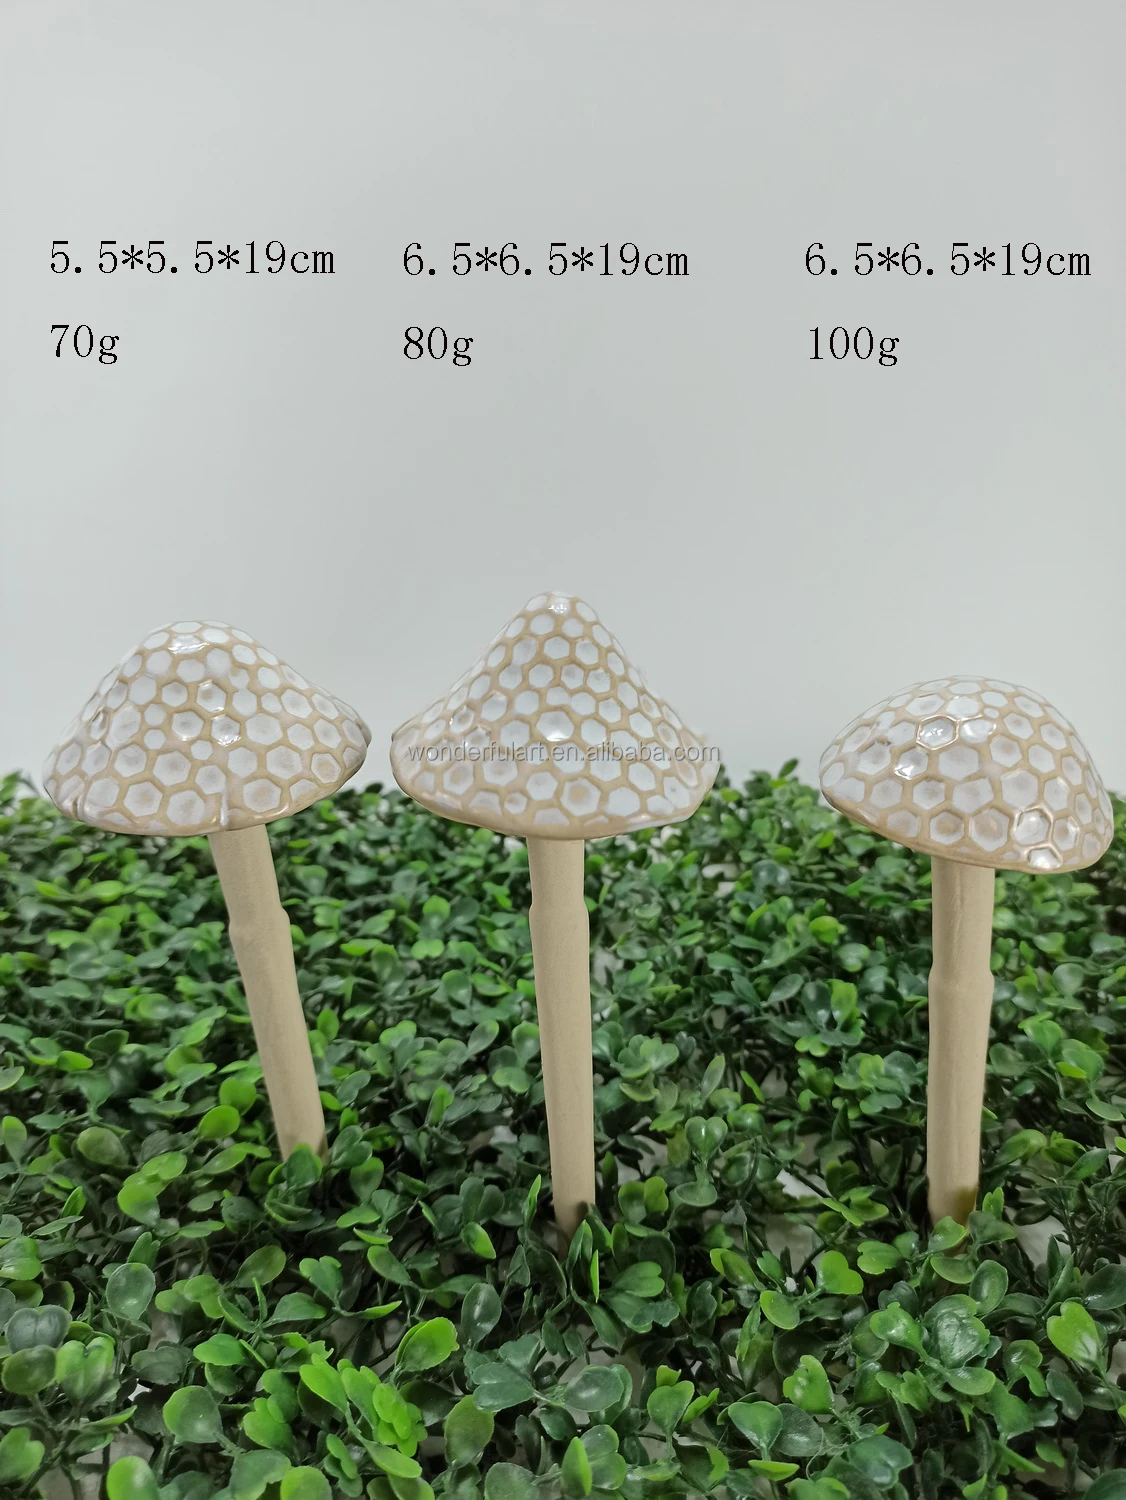 Hot Sell Decorative Ceramic Mushroom Shaped Garden Stakes for Pathway Patio Outdoor Garden Decoration